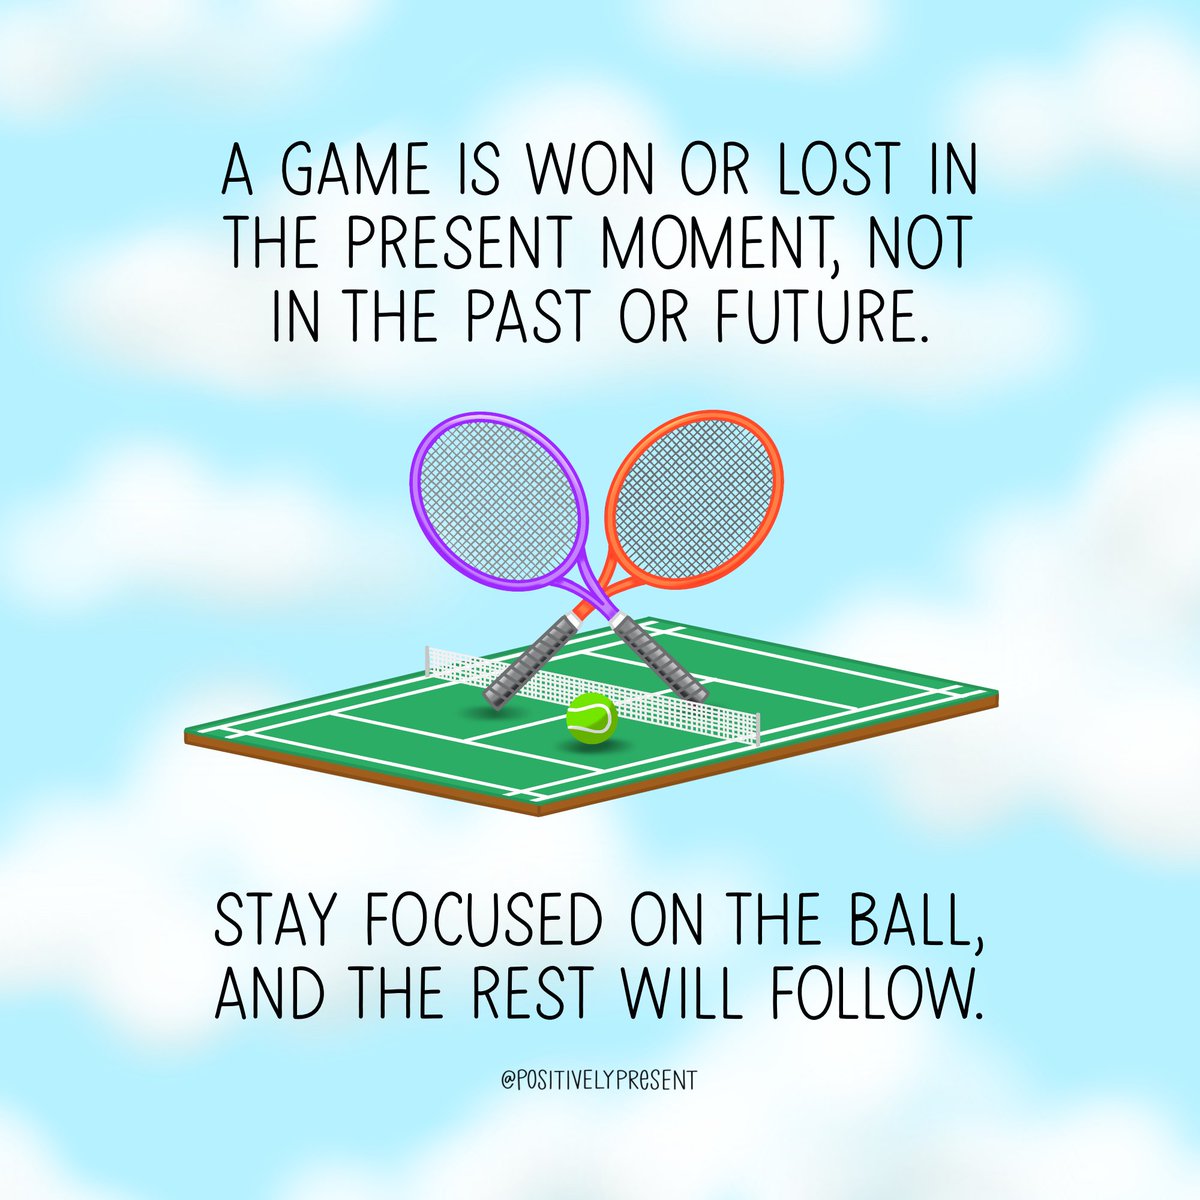 This for anyone who needs a motivating reminder to focus on the present. Keep your eye on the ball, and don’t let others distract you from your goals.